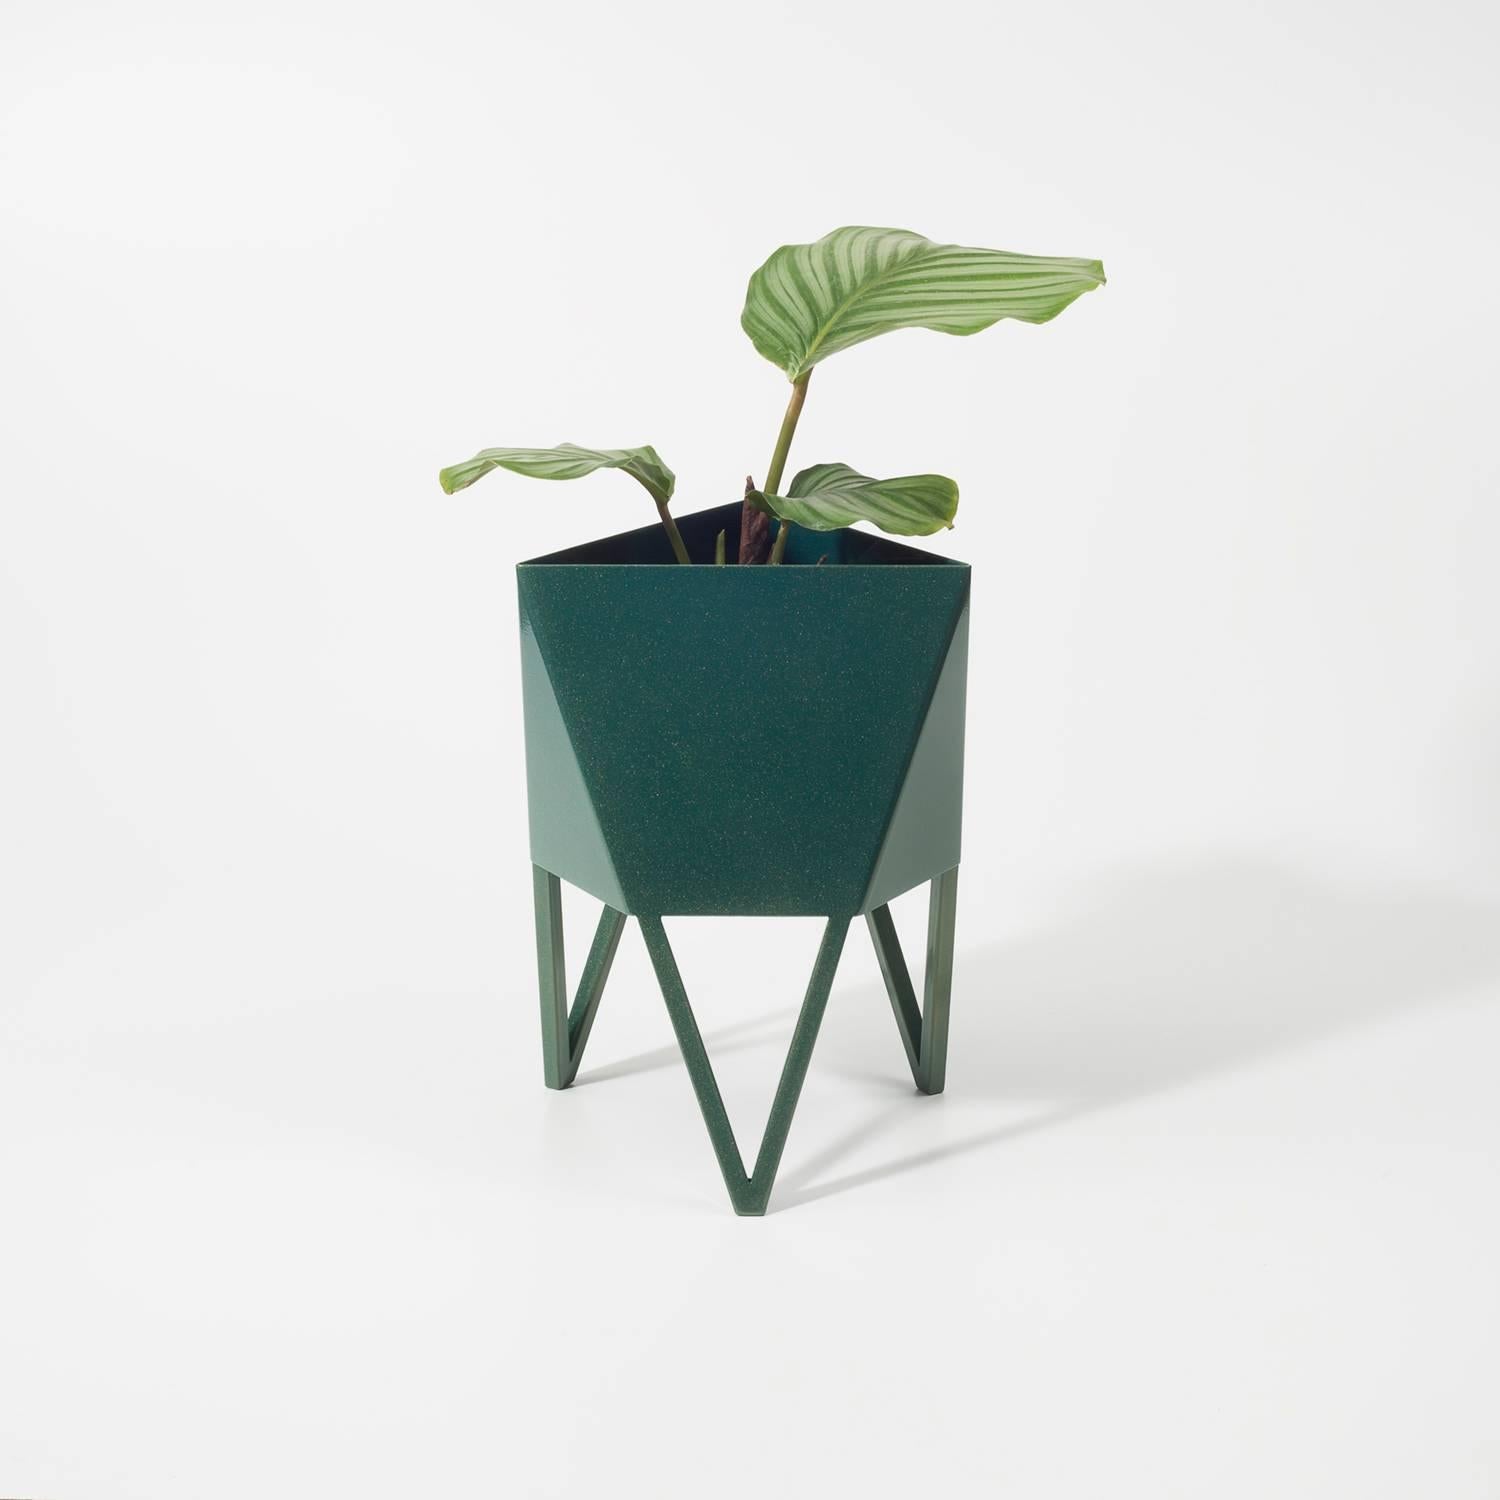 Introducing Force/Collide's signature planter in sunbeam bluegreen. Using a seamless brake-forming technique, one sheet of steel is wrapped into a unique geometric pattern that's triangular at the top and hexagonal at the base. Three V-shaped legs